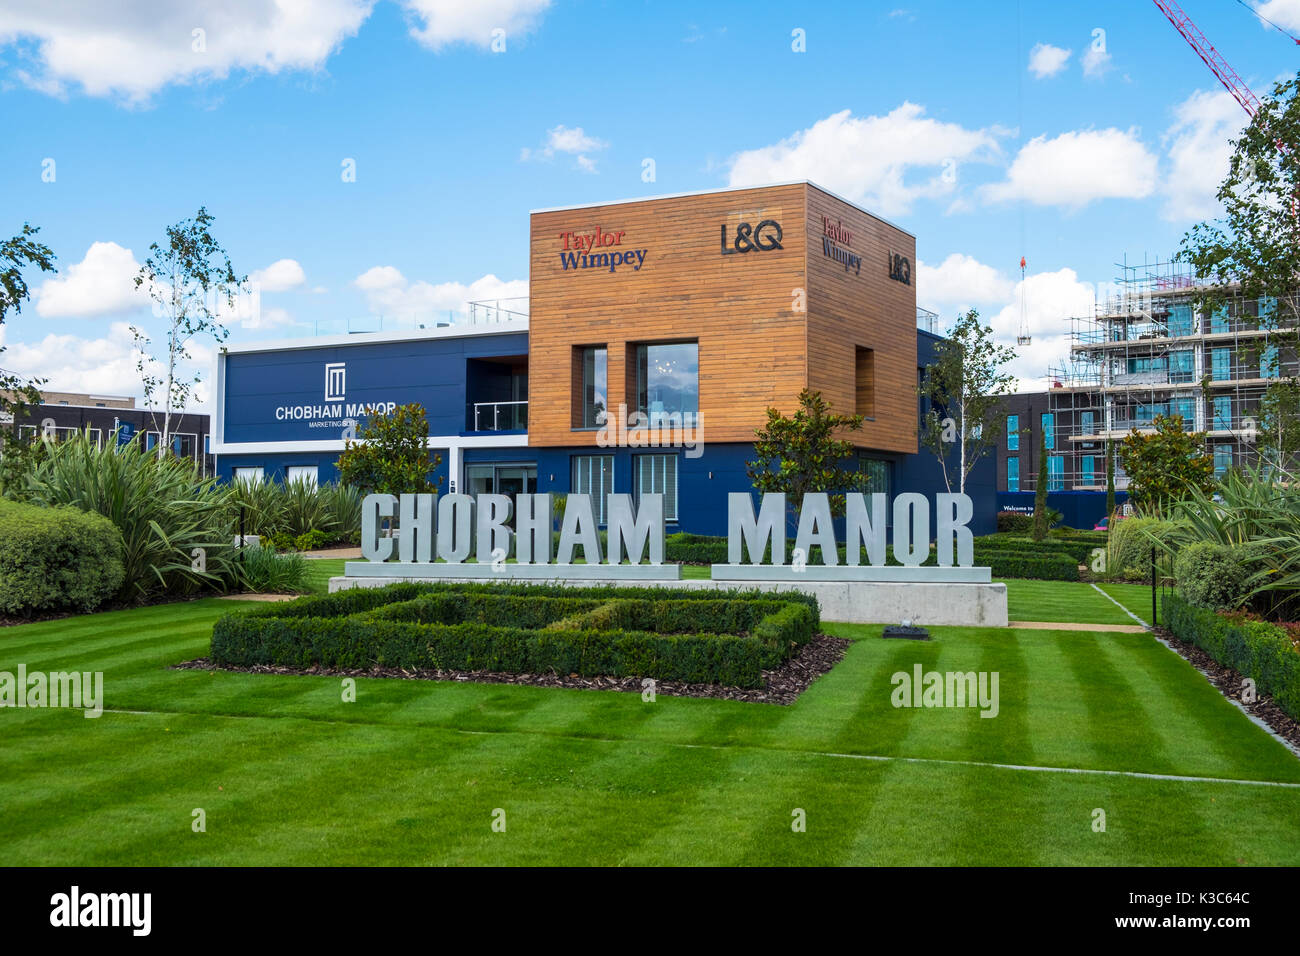 Chobham manor marketing suite, taylor wimpey, L&Q offices Stock Photo